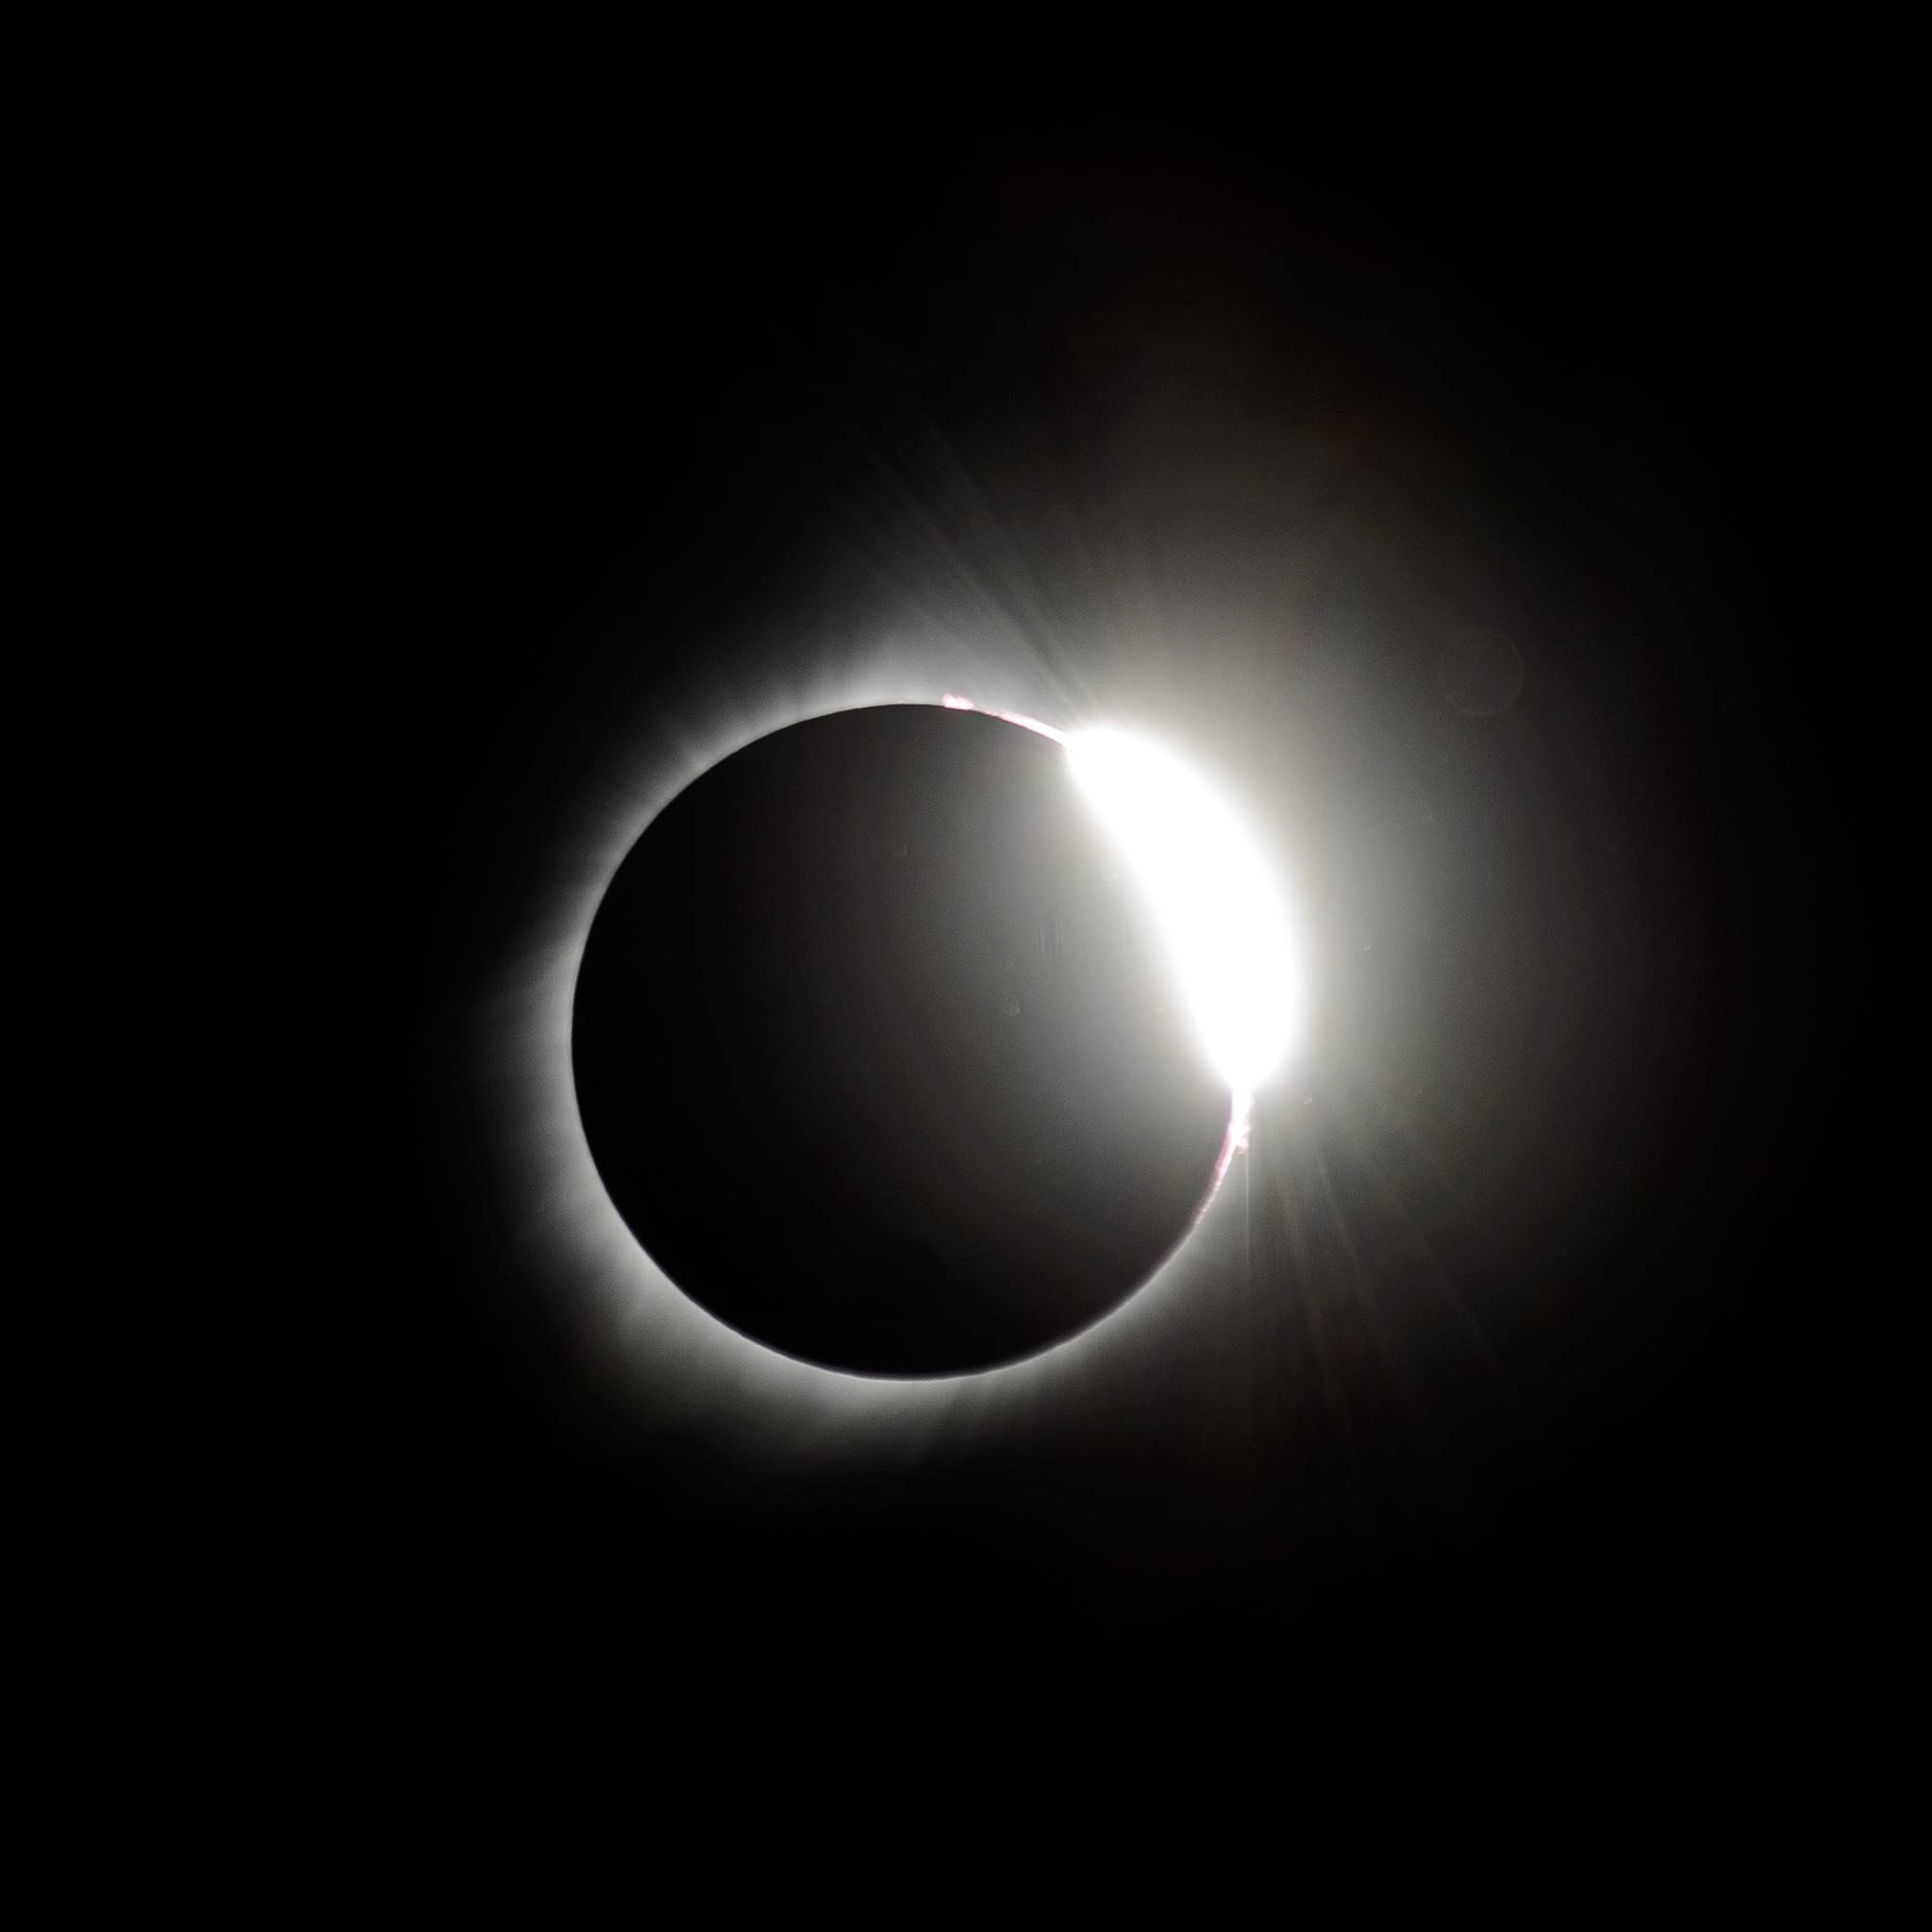 The diamond ring phase of the eclipse. 2017 Eclipse Photos.